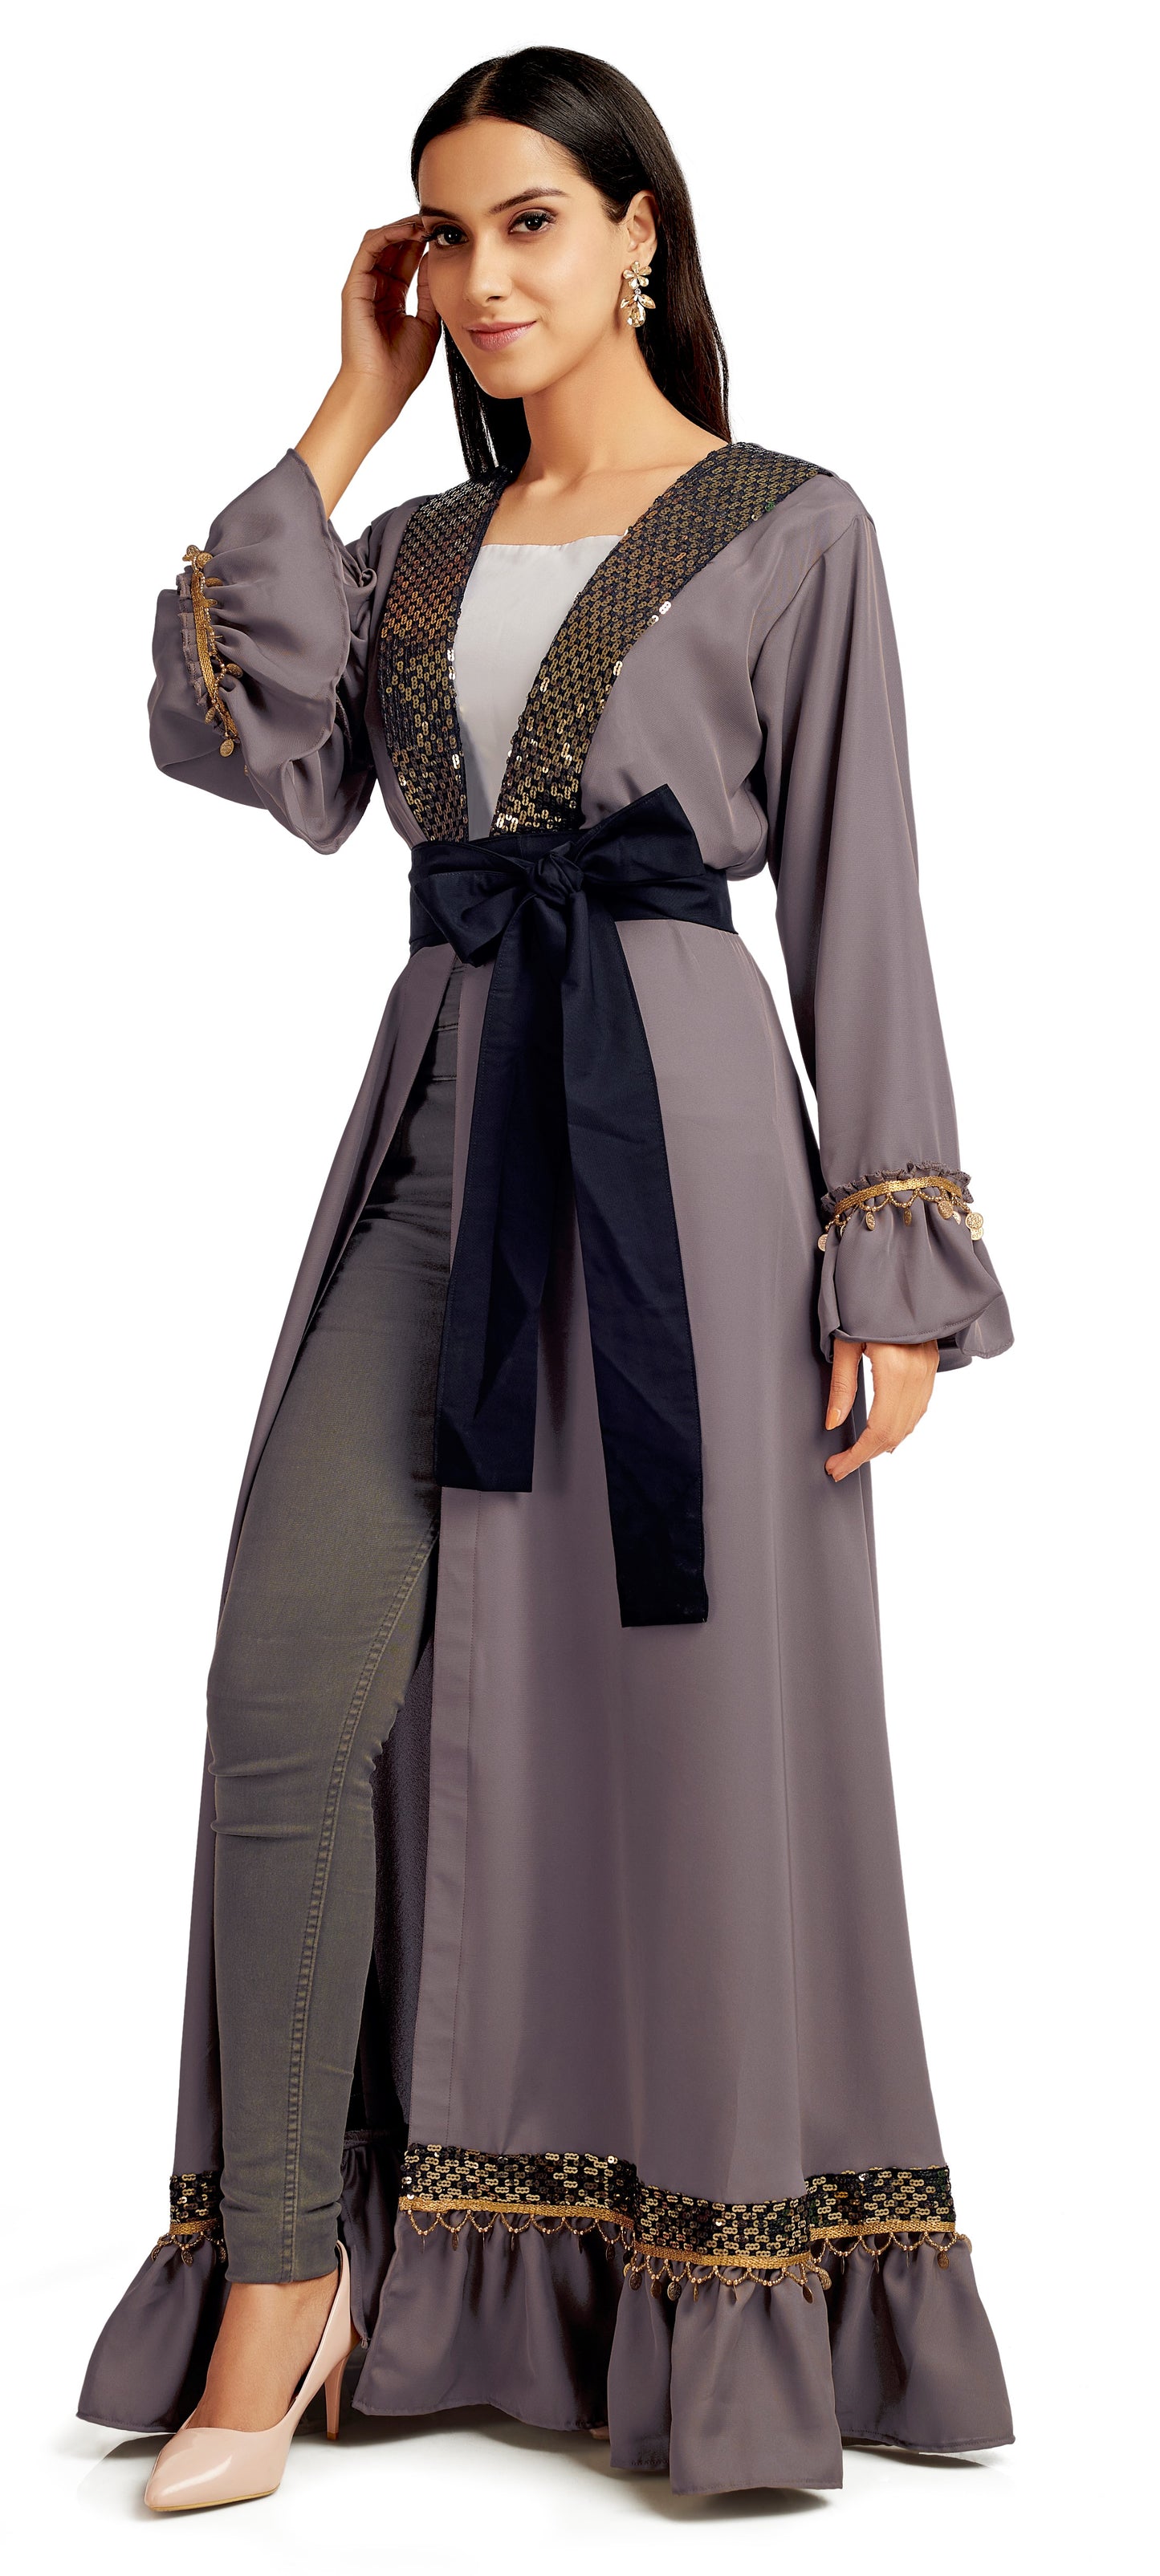 Designer Cardigan & Belt with Chic Embroidery Lace - Maxim Creation